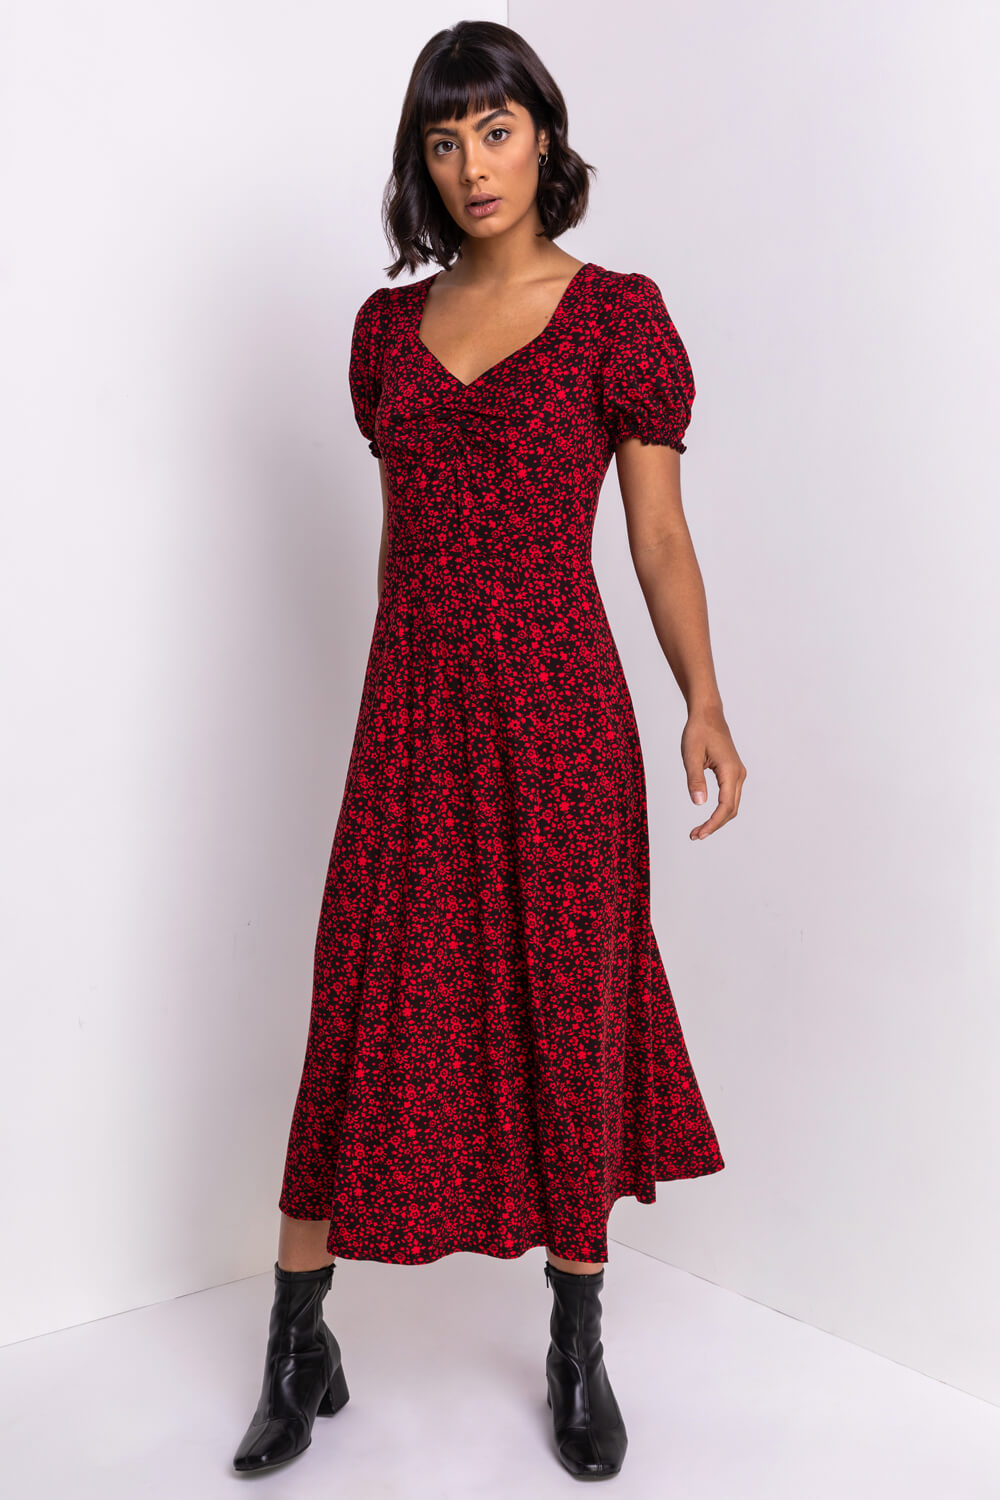 Ditsy Floral Jersey Midi Dress in Red - Roman Originals UK